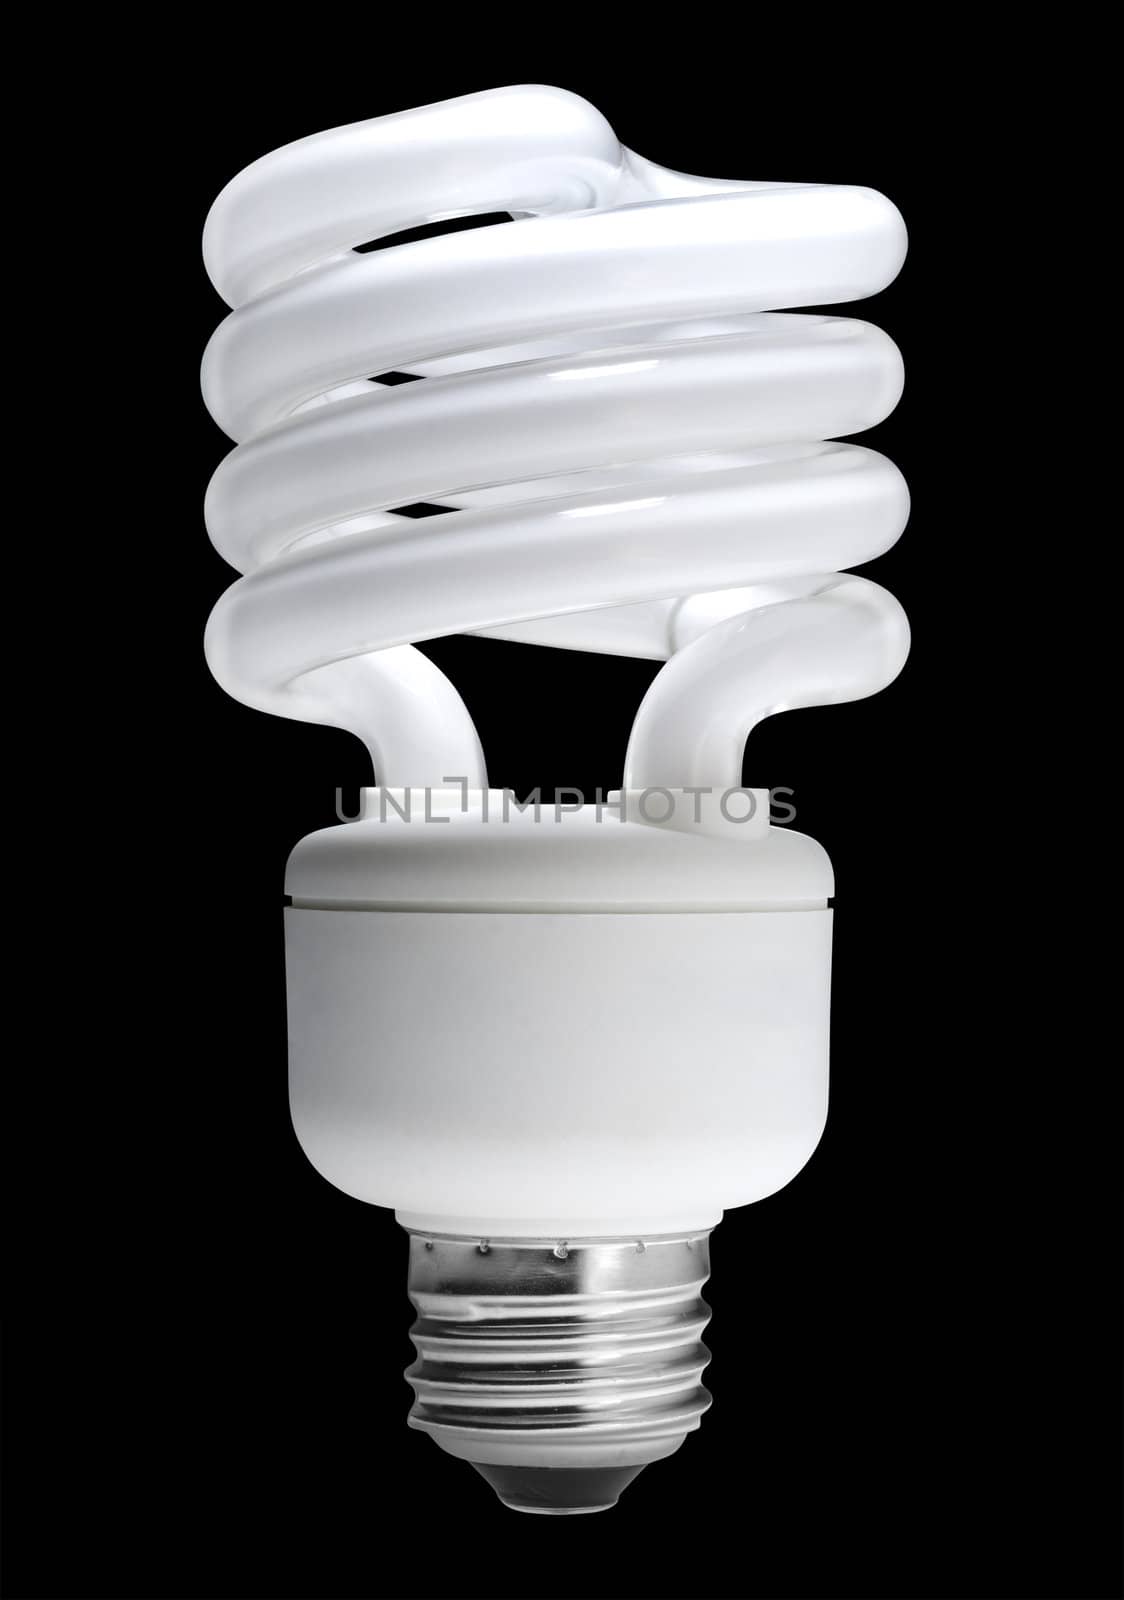 Fluorescent light bulb, isolated by f/2sumicron